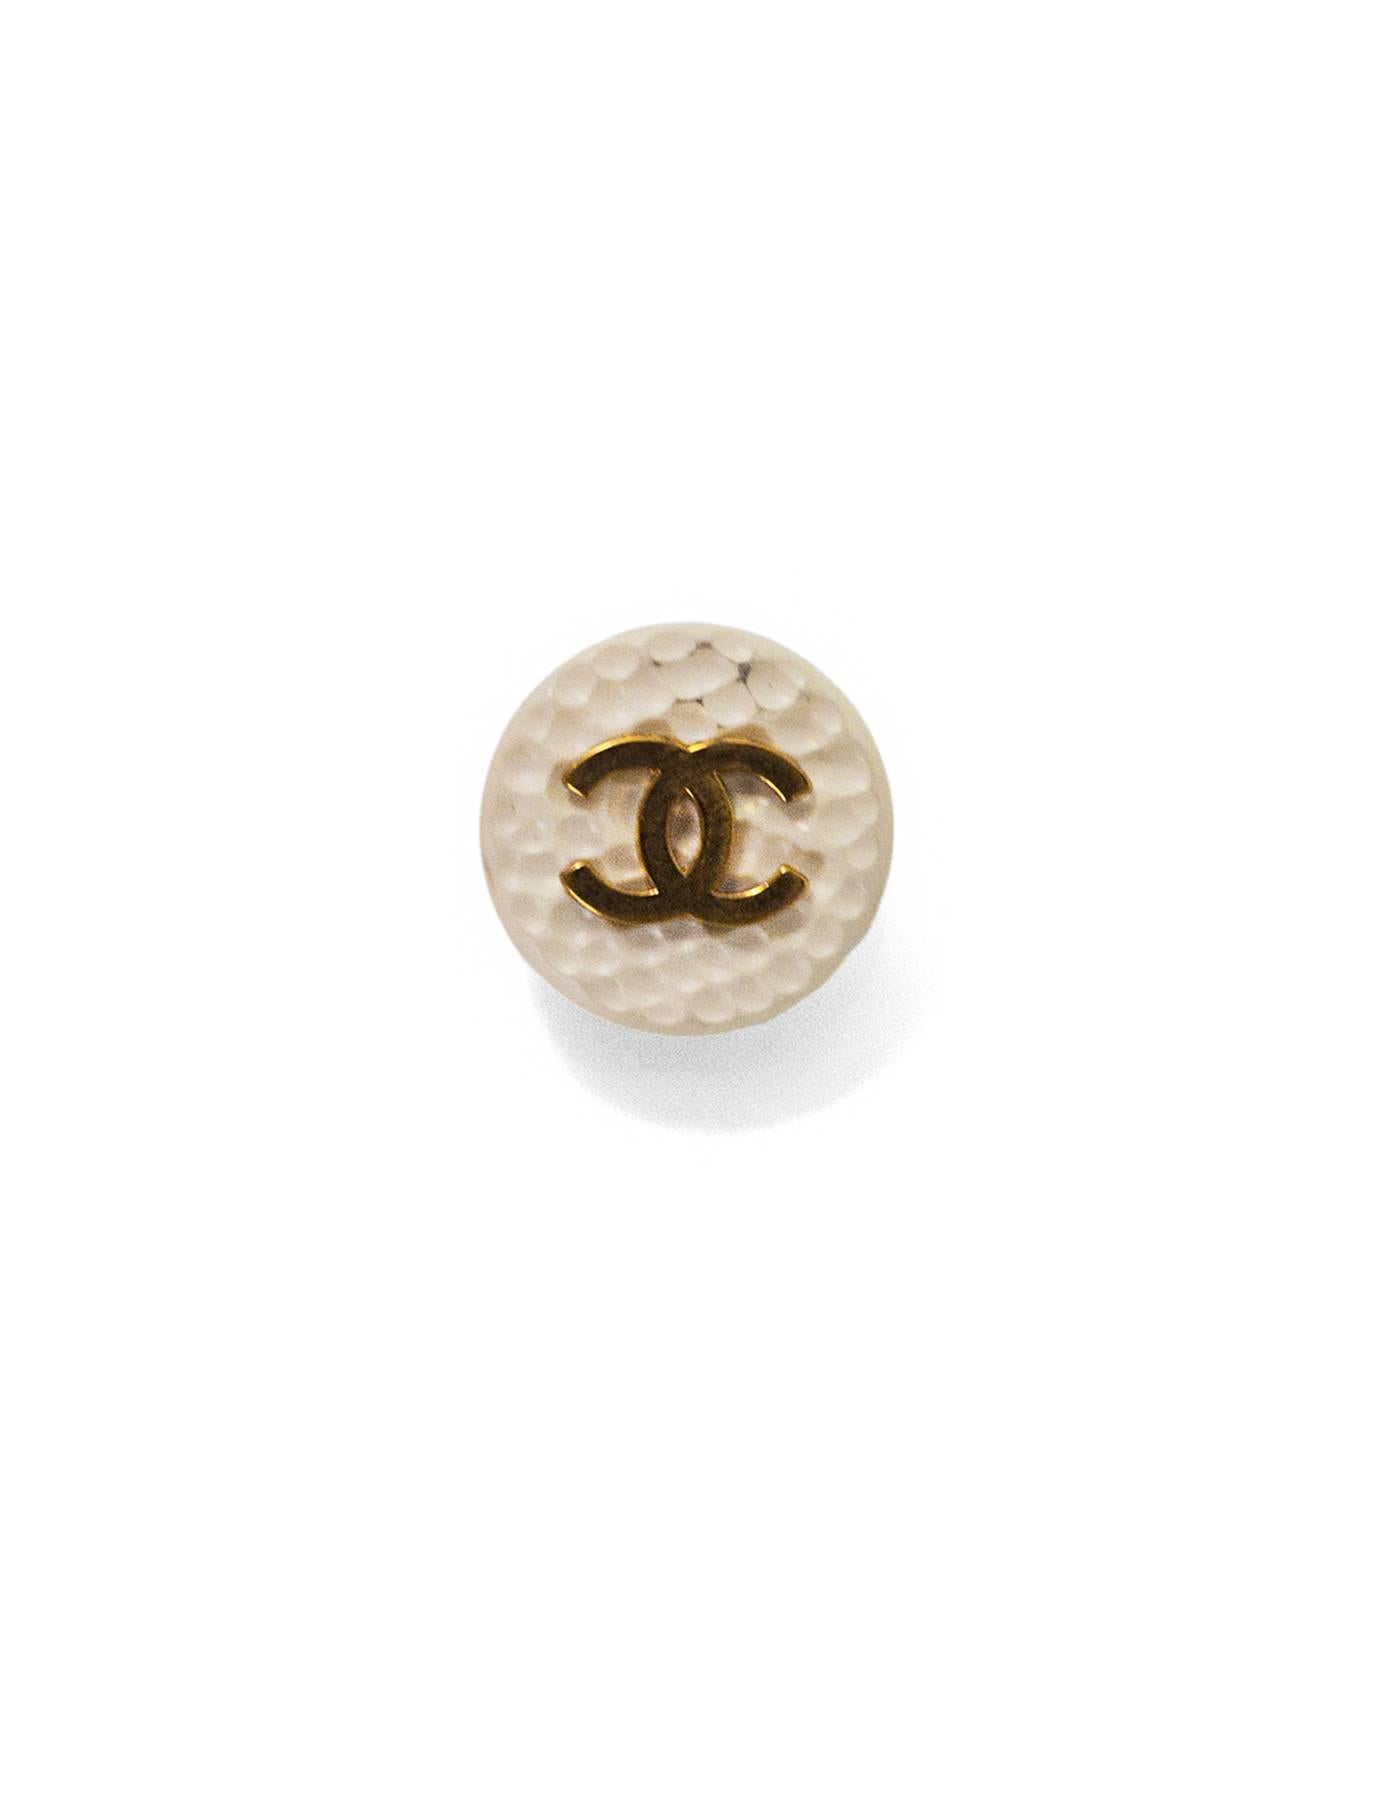 Chanel Cream & Goldtone Textured CC Buttons
Features set of two 20mm buttons

Color: Cream, gold
Hardware: Goldtone
Materials: Resin, metal
Stamp: Chanel
Overall Condition: Excellent good pre-owned condition, light surface